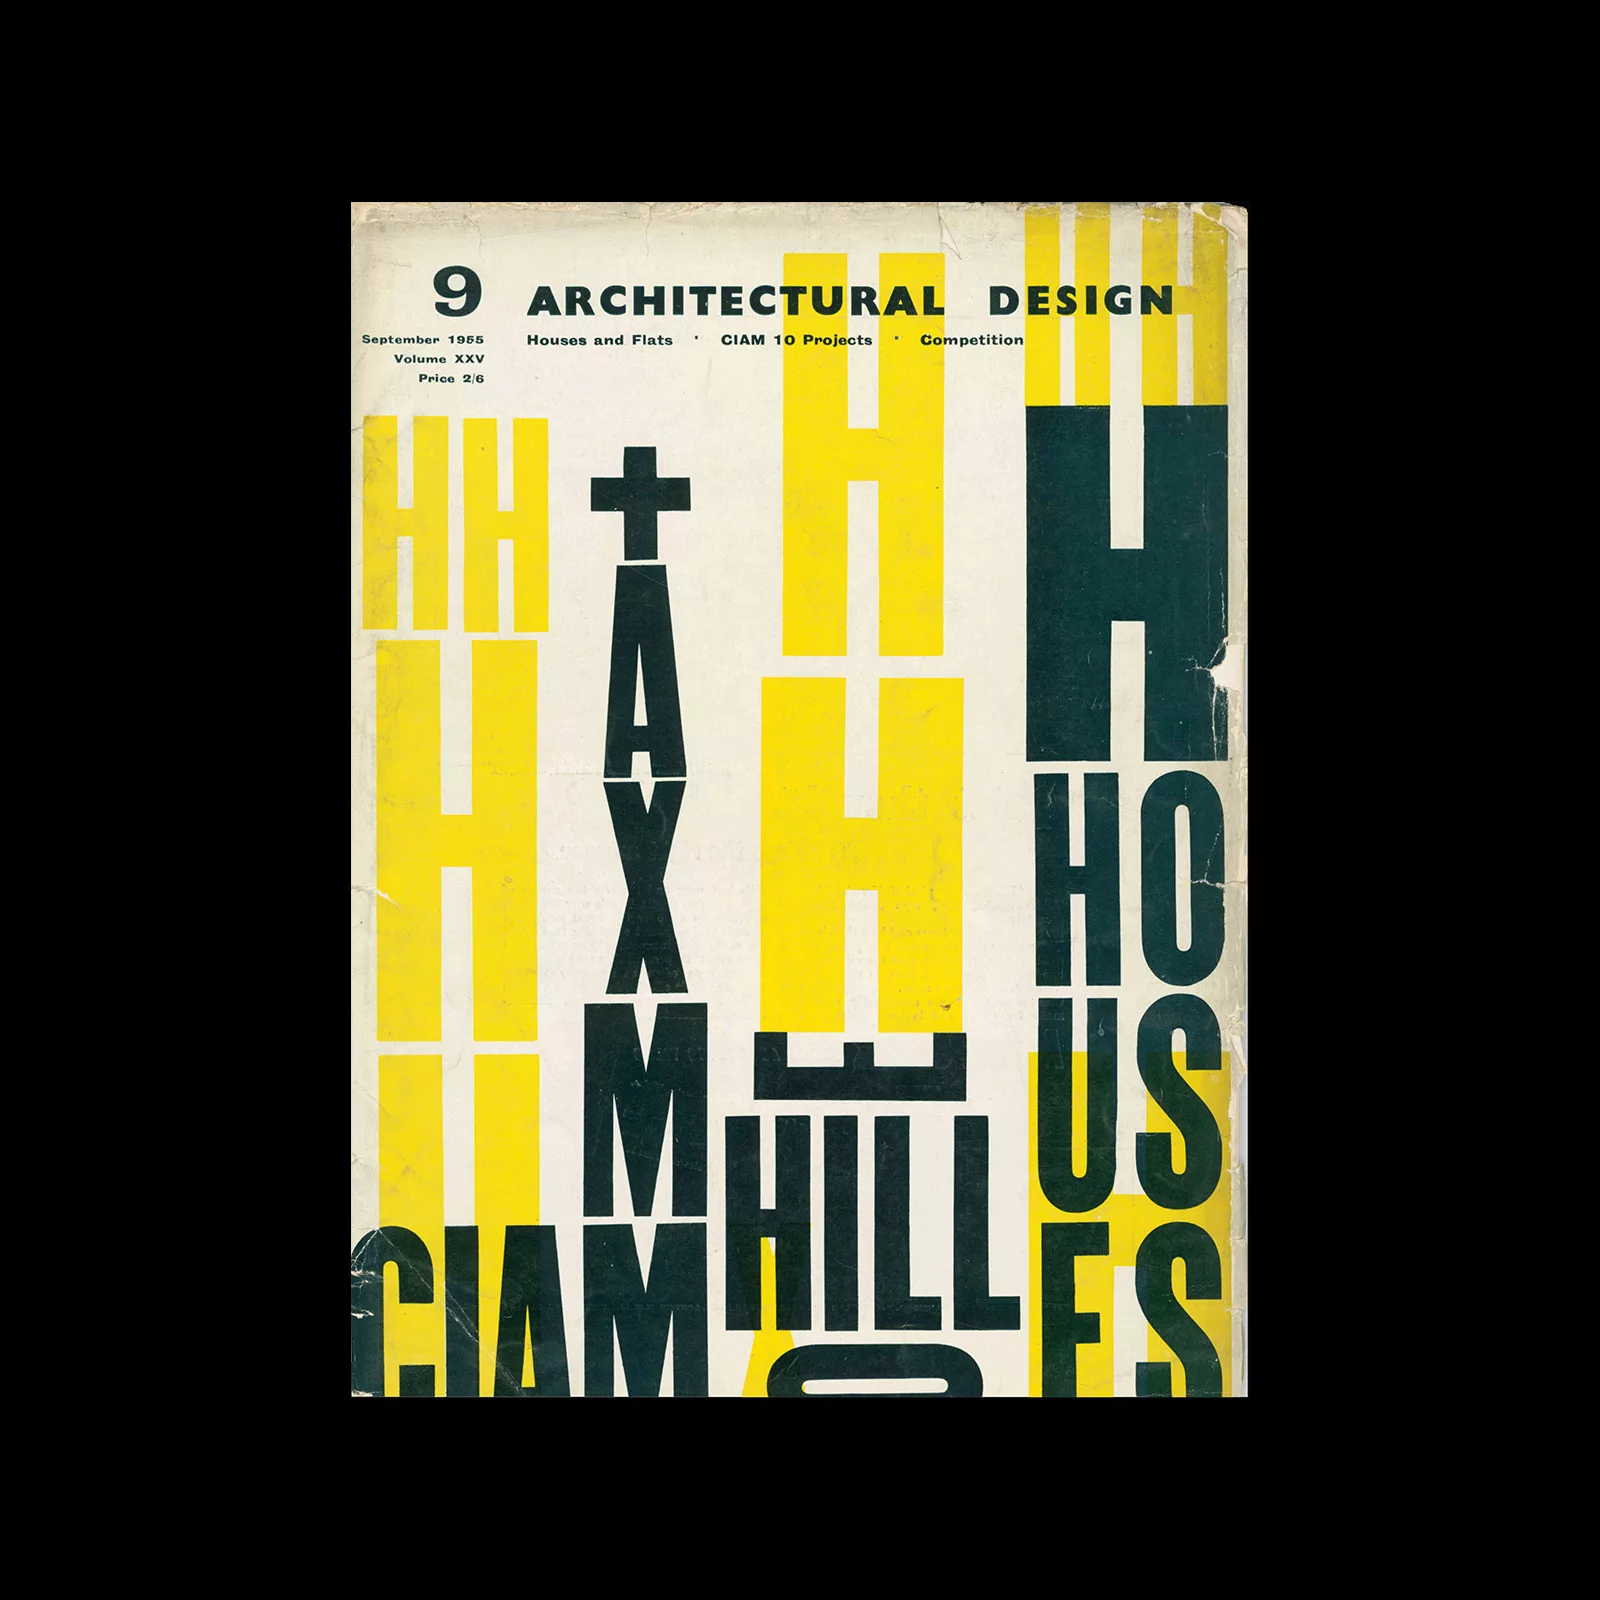 Architectural Design, September 1965. Cover design by Theo Crosby